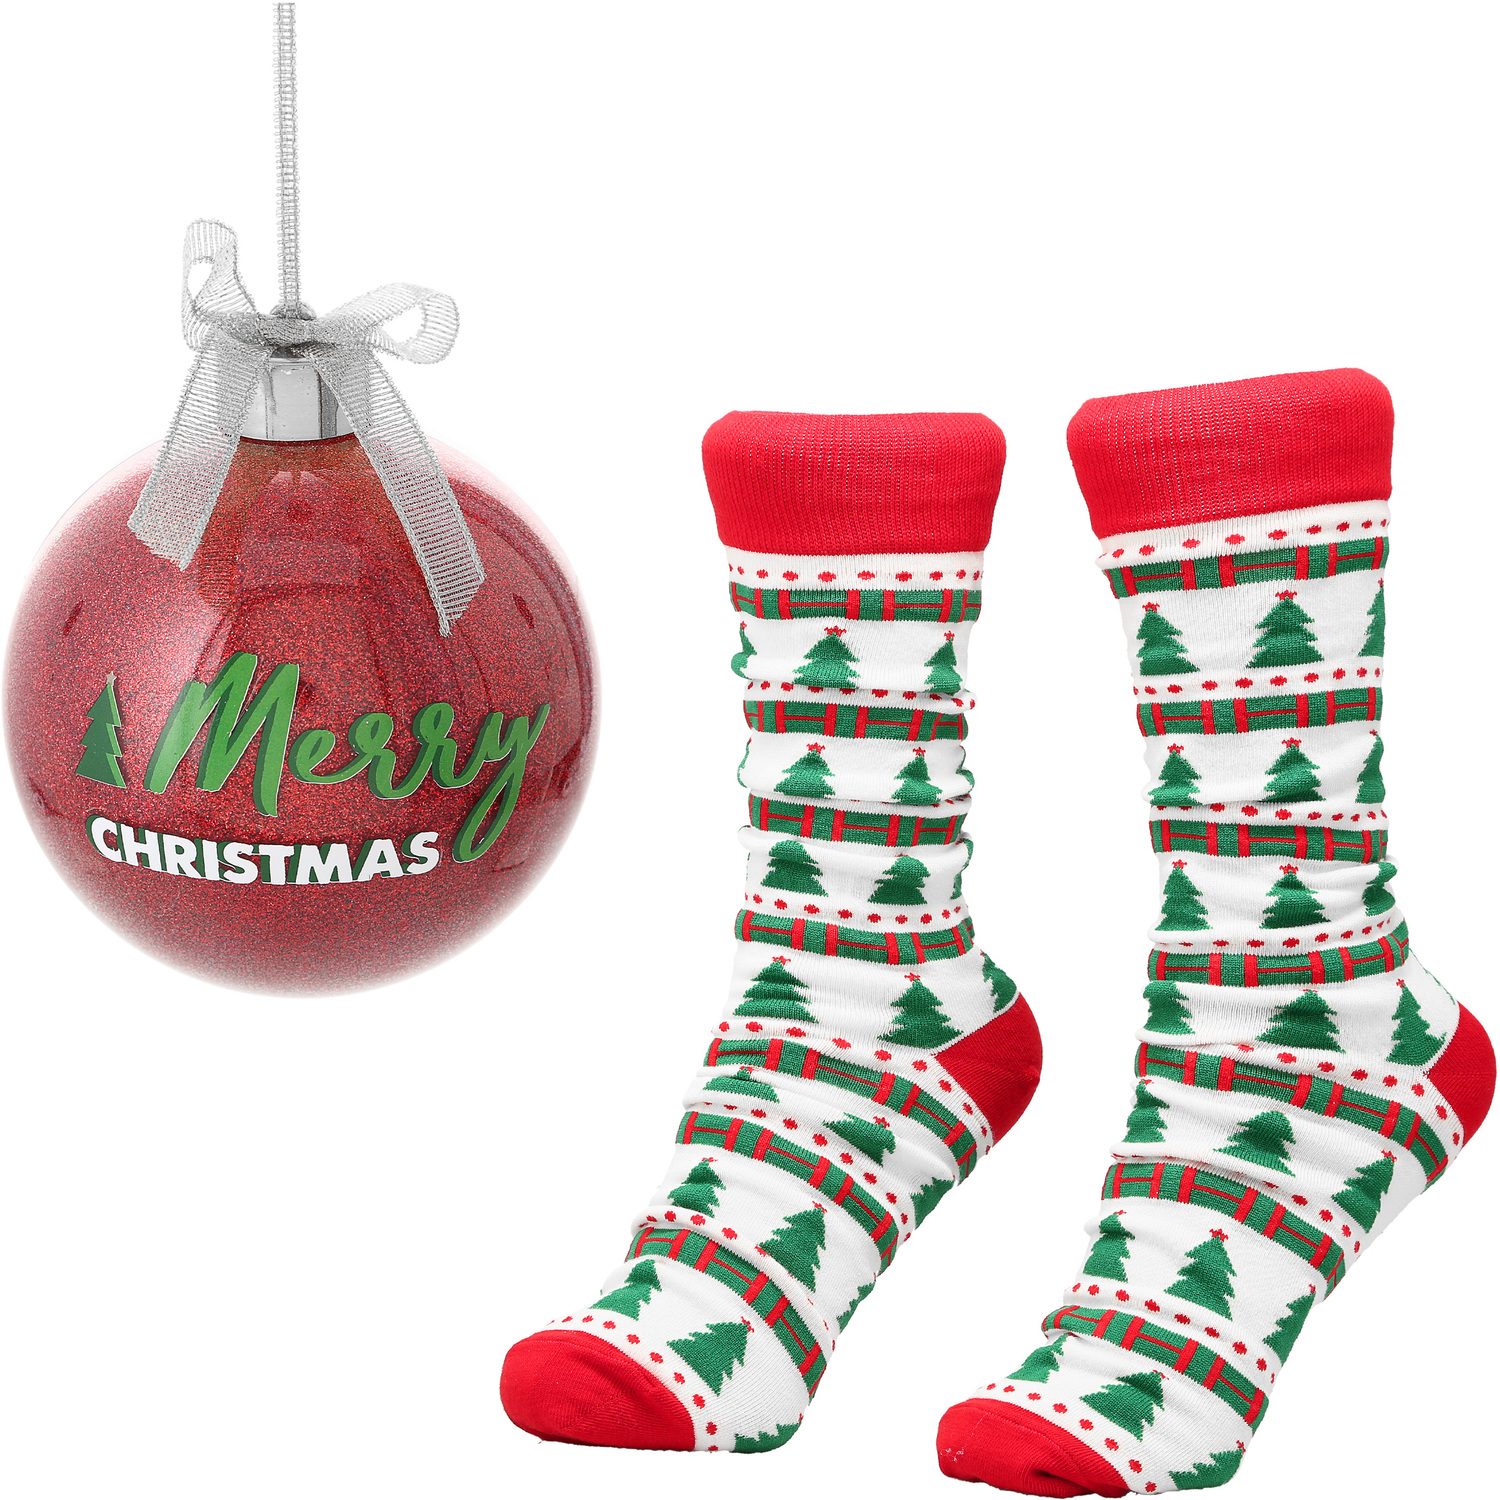 Merry Christmas by Warm & Toe-sty - Merry Christmas - 4" Ornament with Unisex Holiday Socks